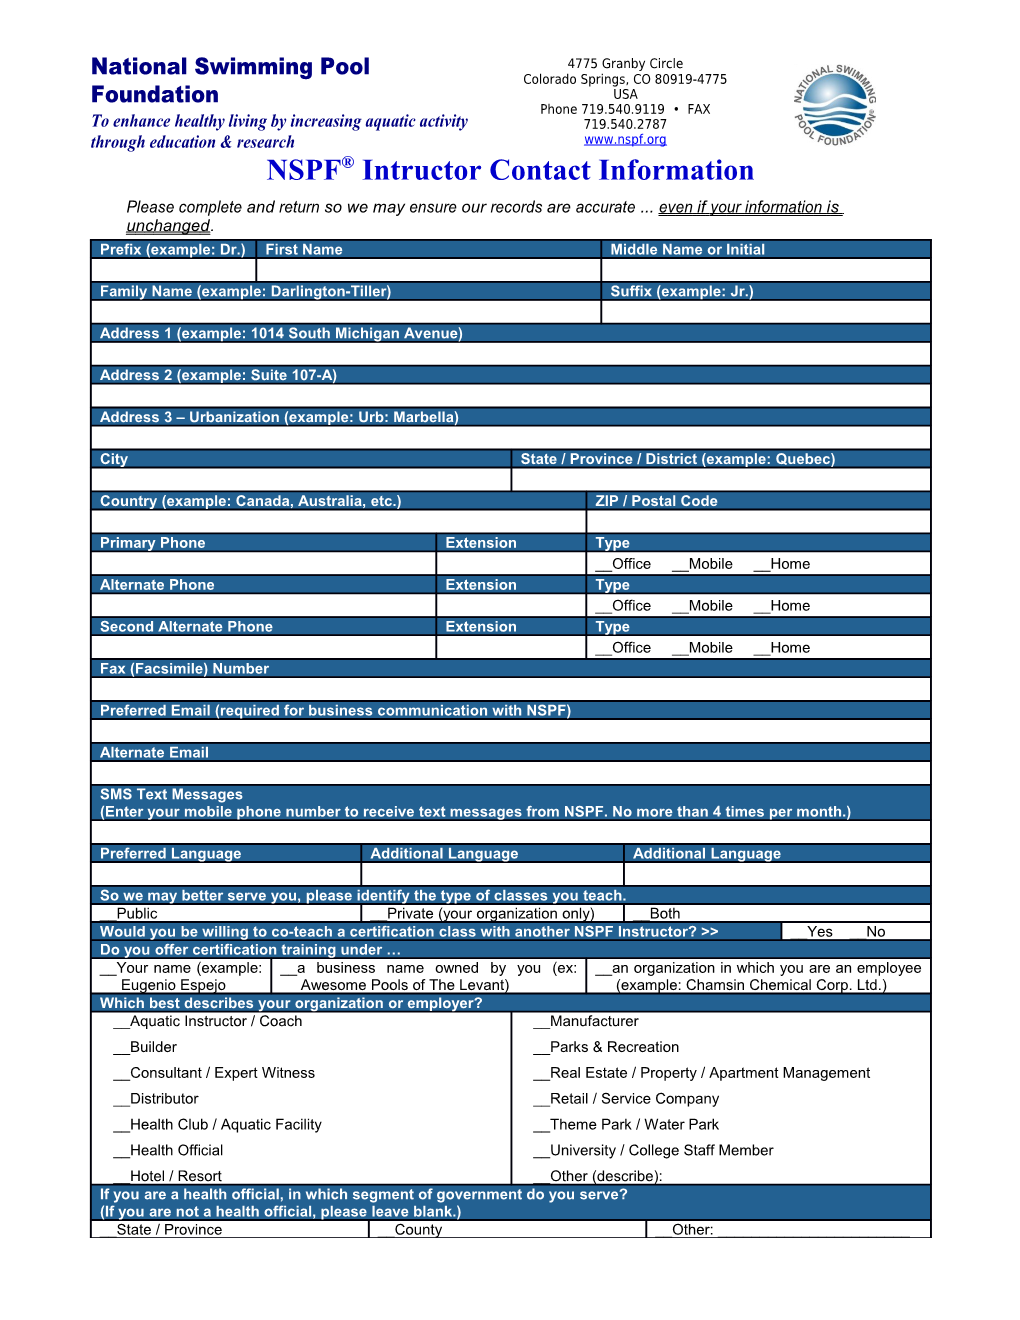 NSPF Intructor Contact Information